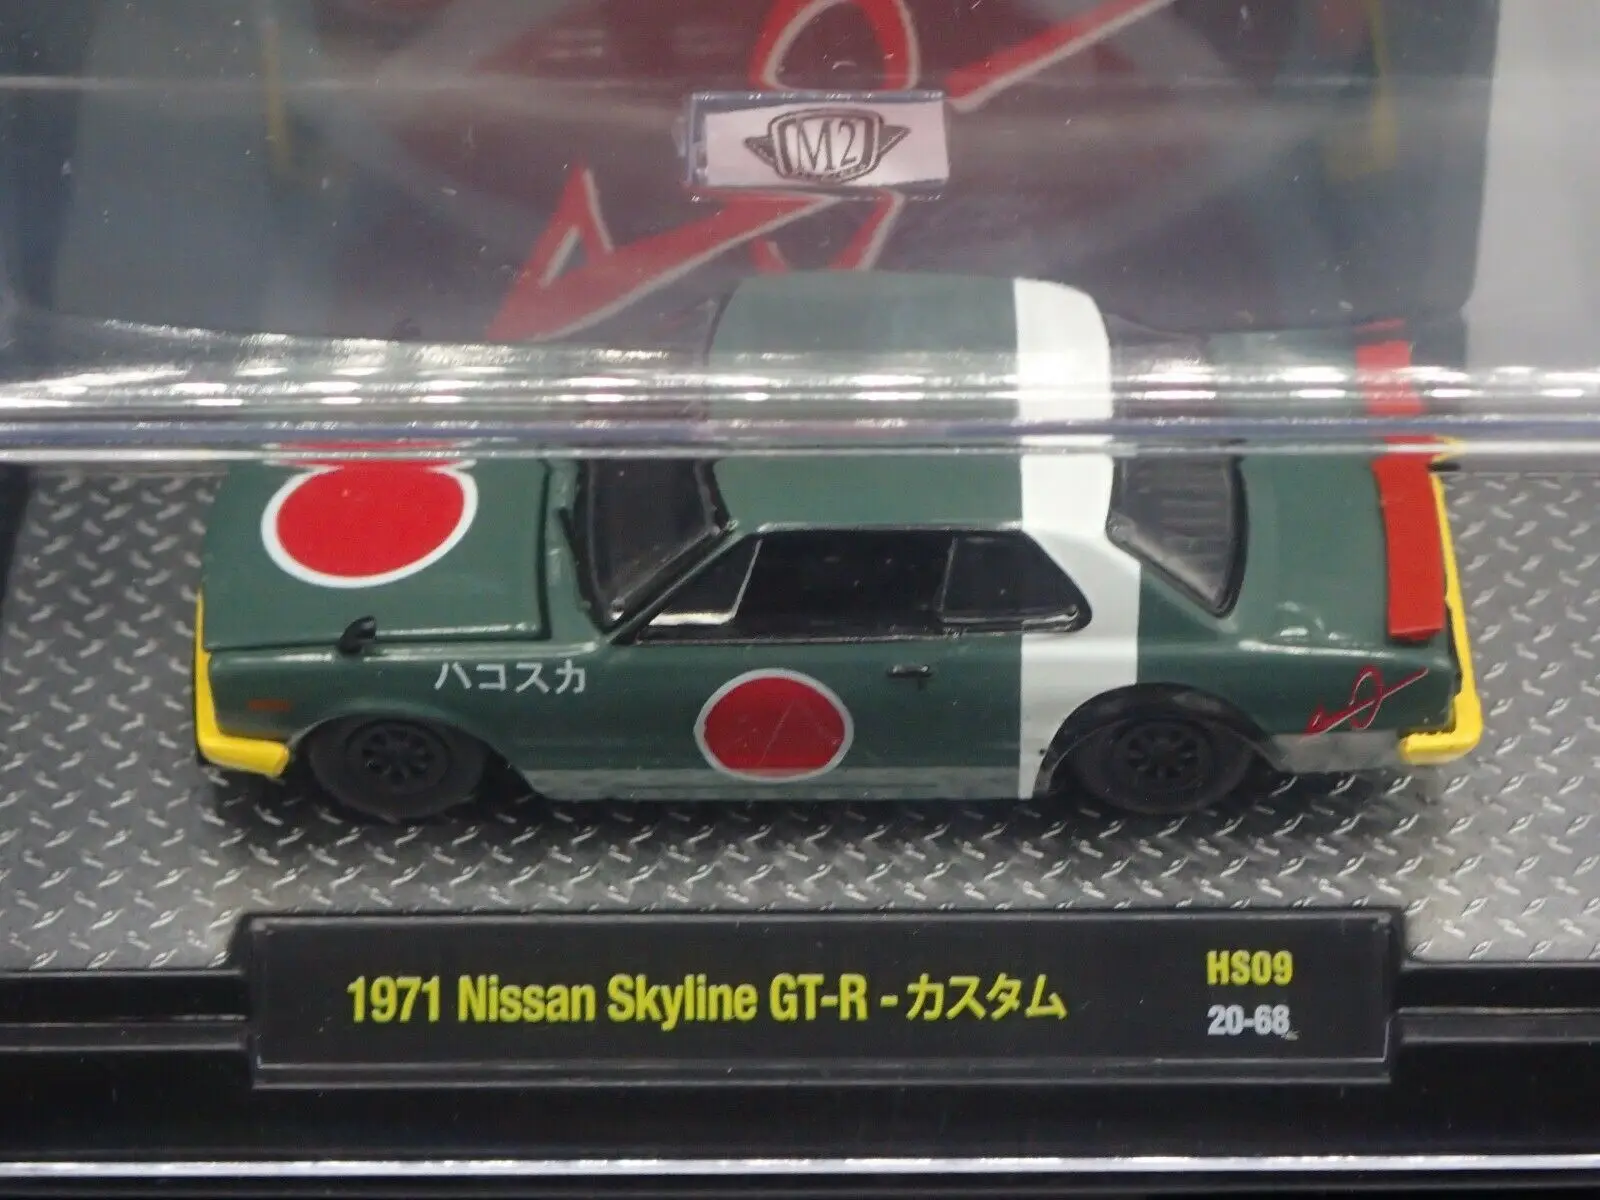 M2 The Nissans Skyline Gt R 71 Zero Fighter Jet Painted With The Sun Flag K1312 Diecasts Toy Vehicles Aliexpress